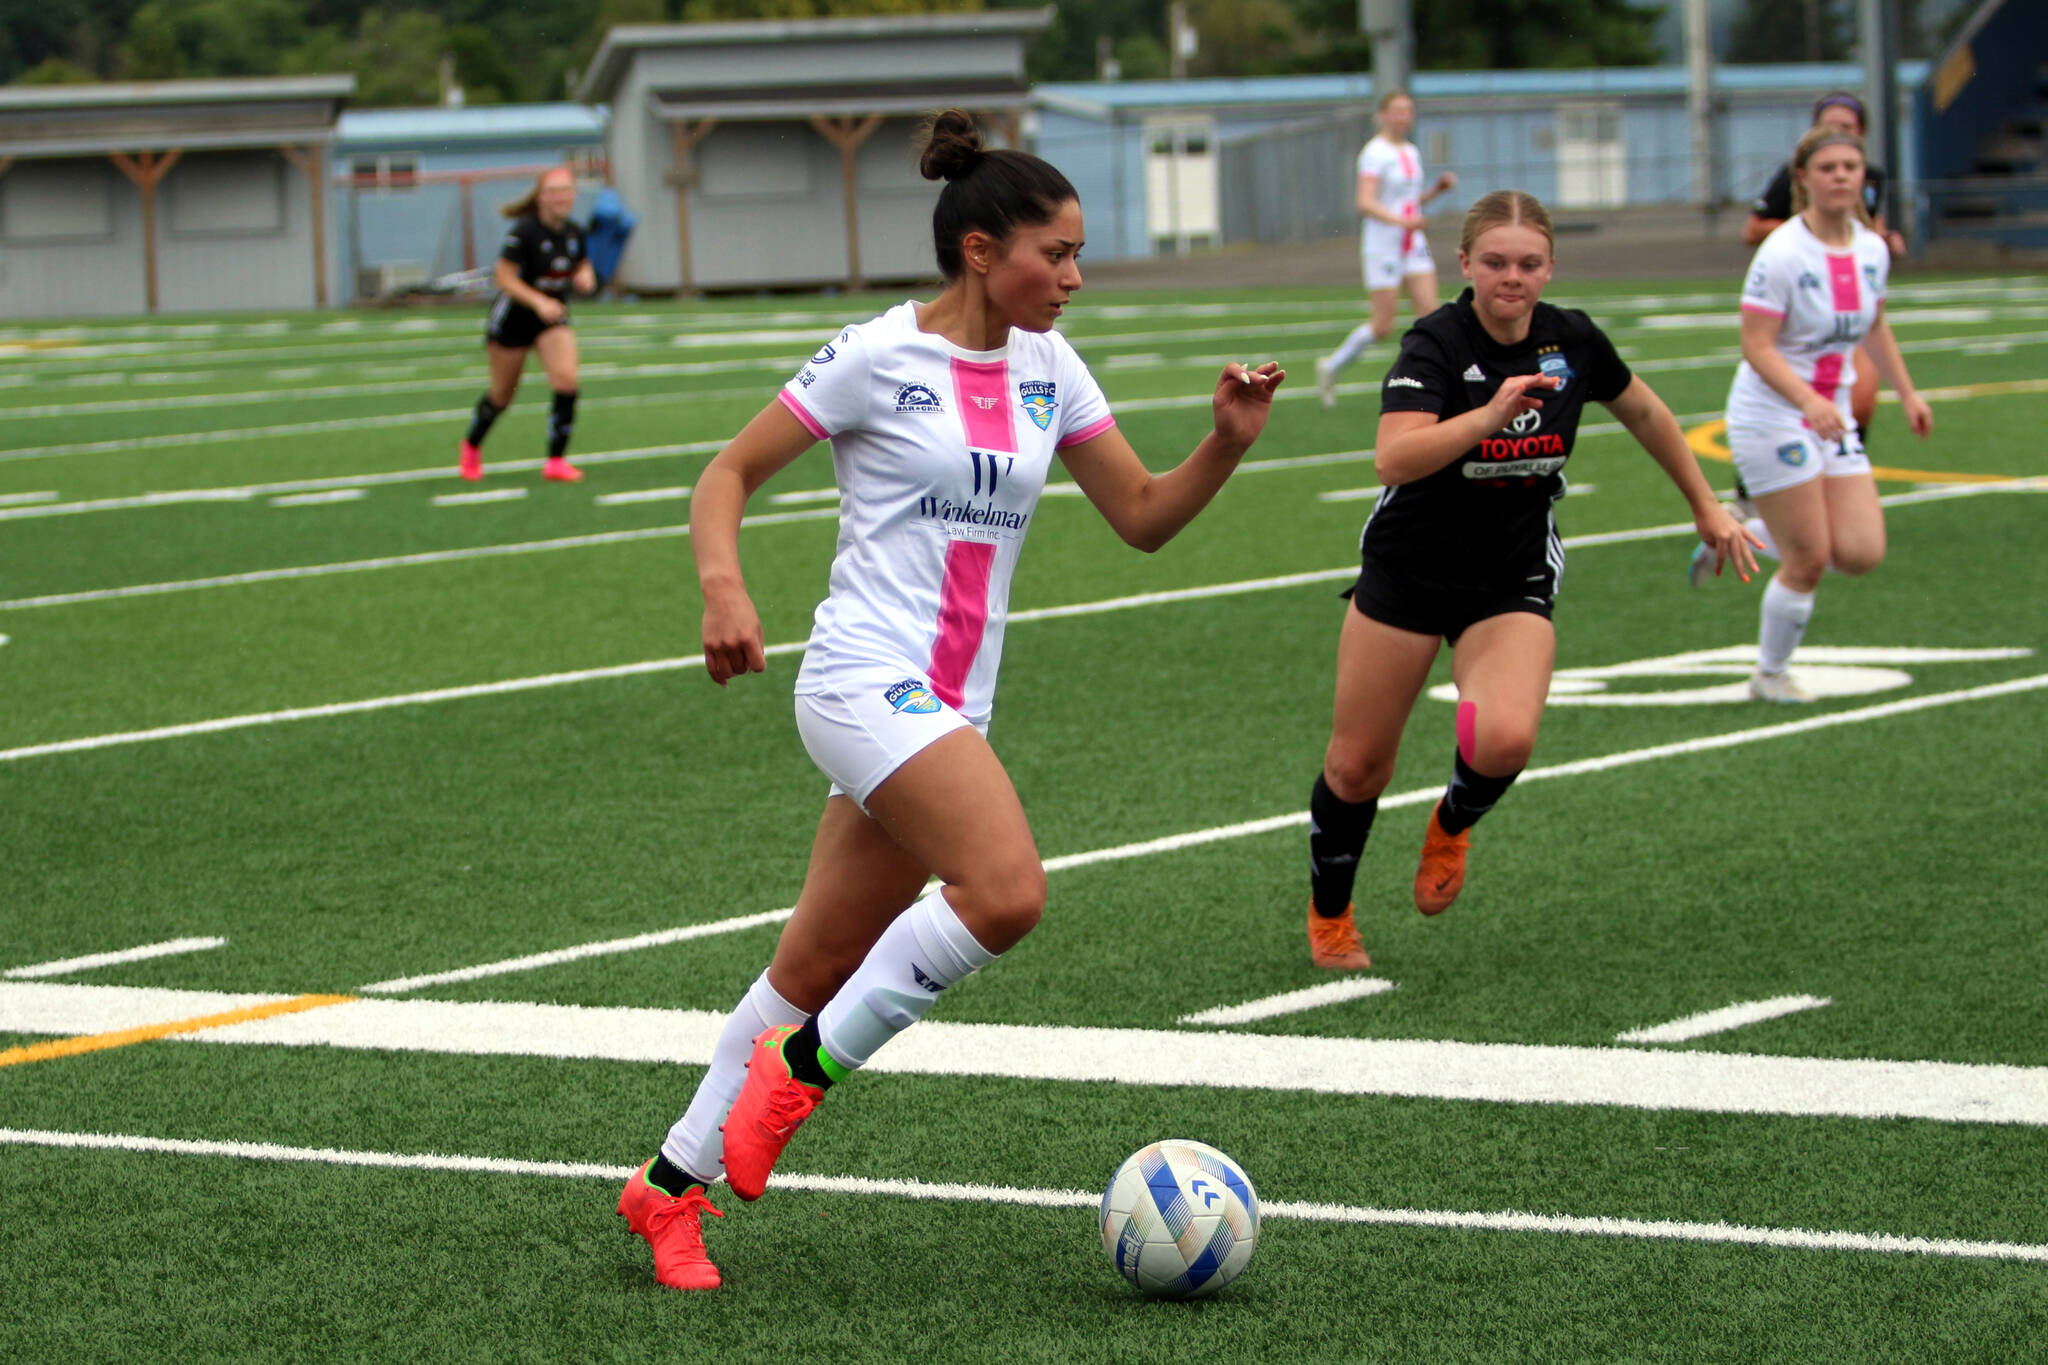 RYAN SPARKS | THE DAILY WORLD Former Aberdeen standout and Grays Harbor Gulls forward Marina Marll pushes the ball forward during a 6-0 loss to Washington Premier Legends on Saturday at Stewart Field in Aberdeen.